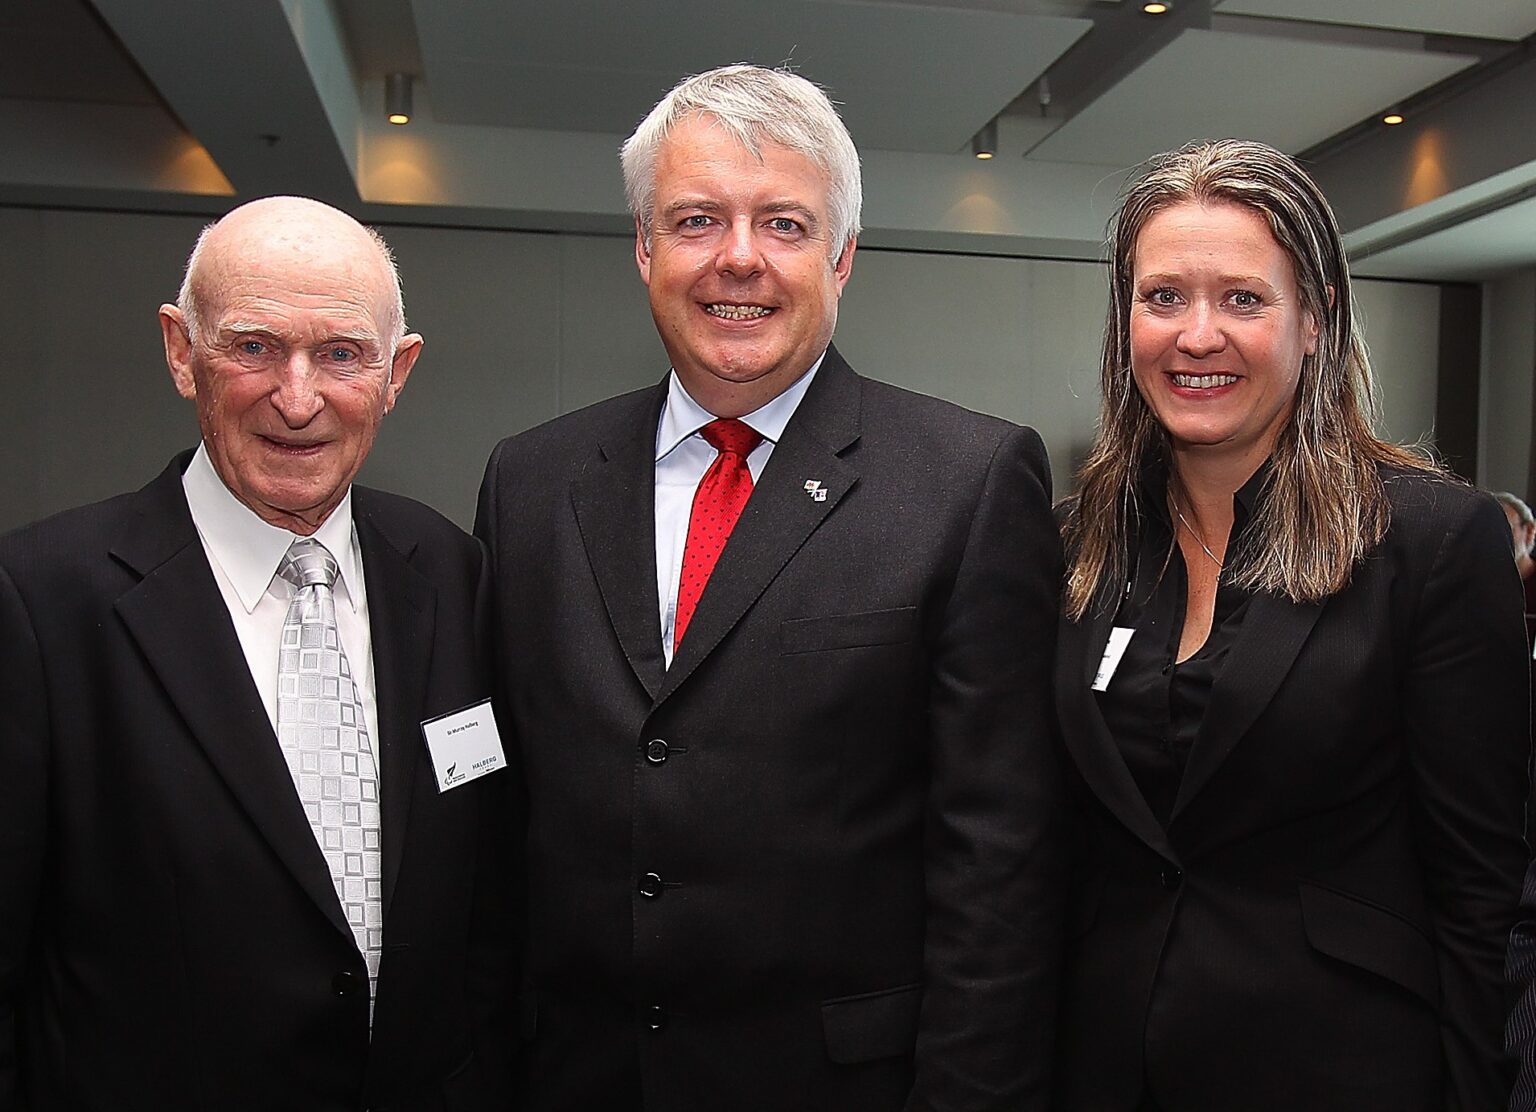 Sir Murray Halberg, First Minister of Wales, Rt Hon Carwyn Jones, Chief Executive of Paralympics New Zealand, Fiona Allan